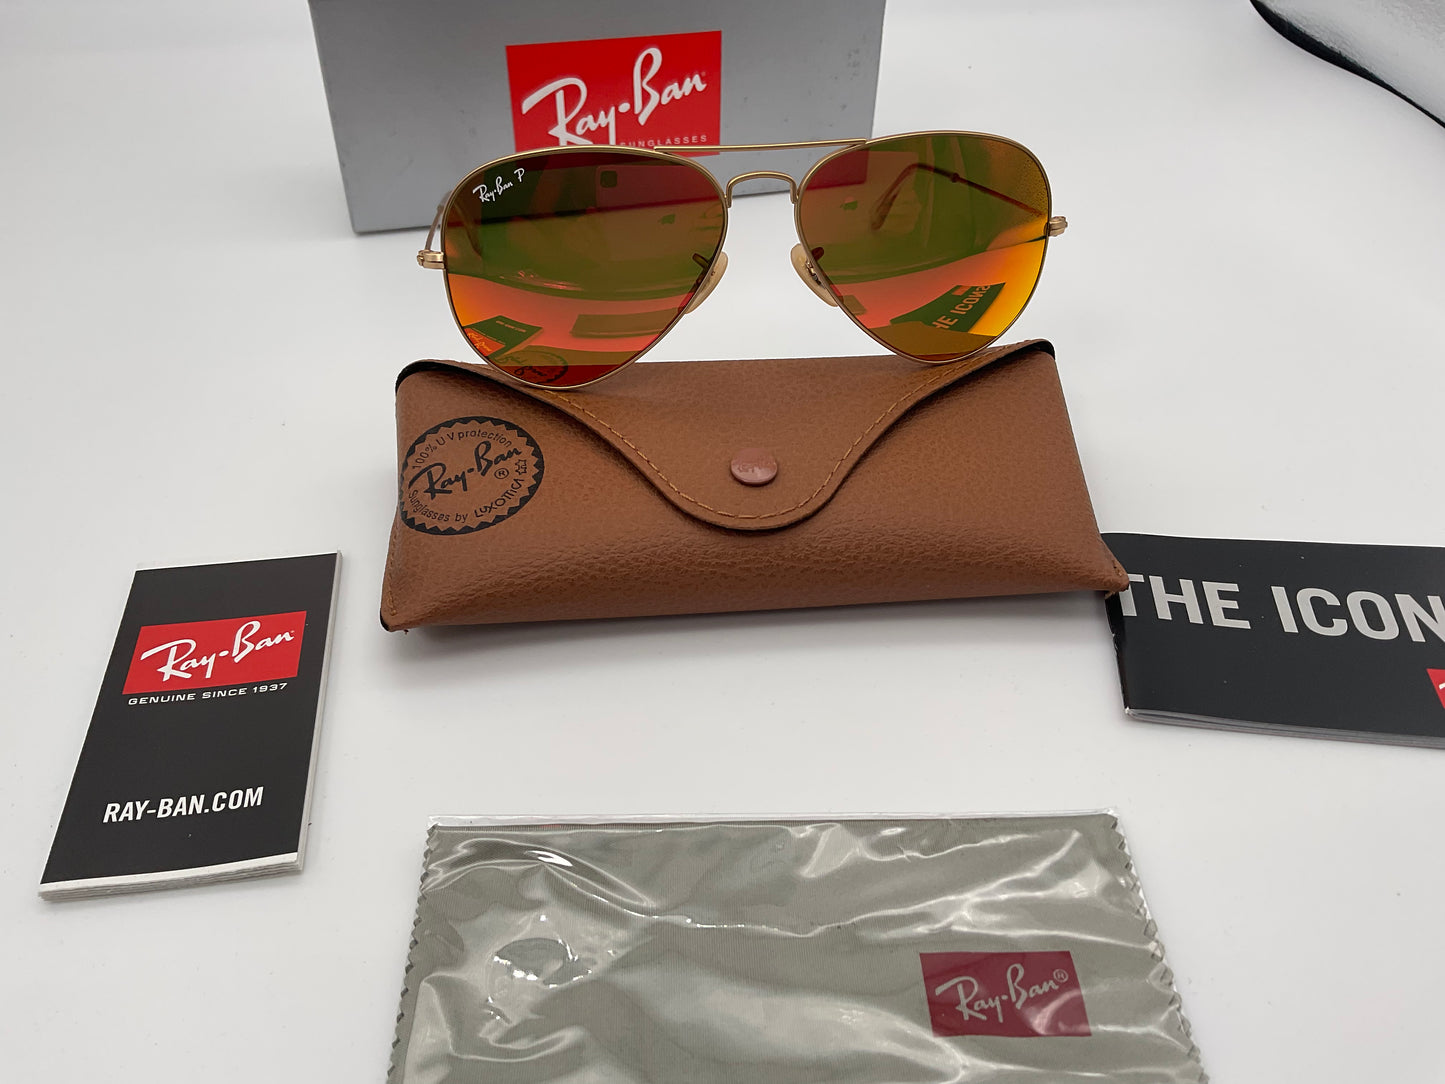 Ray Ban Aviator 58mm Flash Lenses Polarized Orange Sunglasses RB3025 112/4D made in Italy MSRP $213